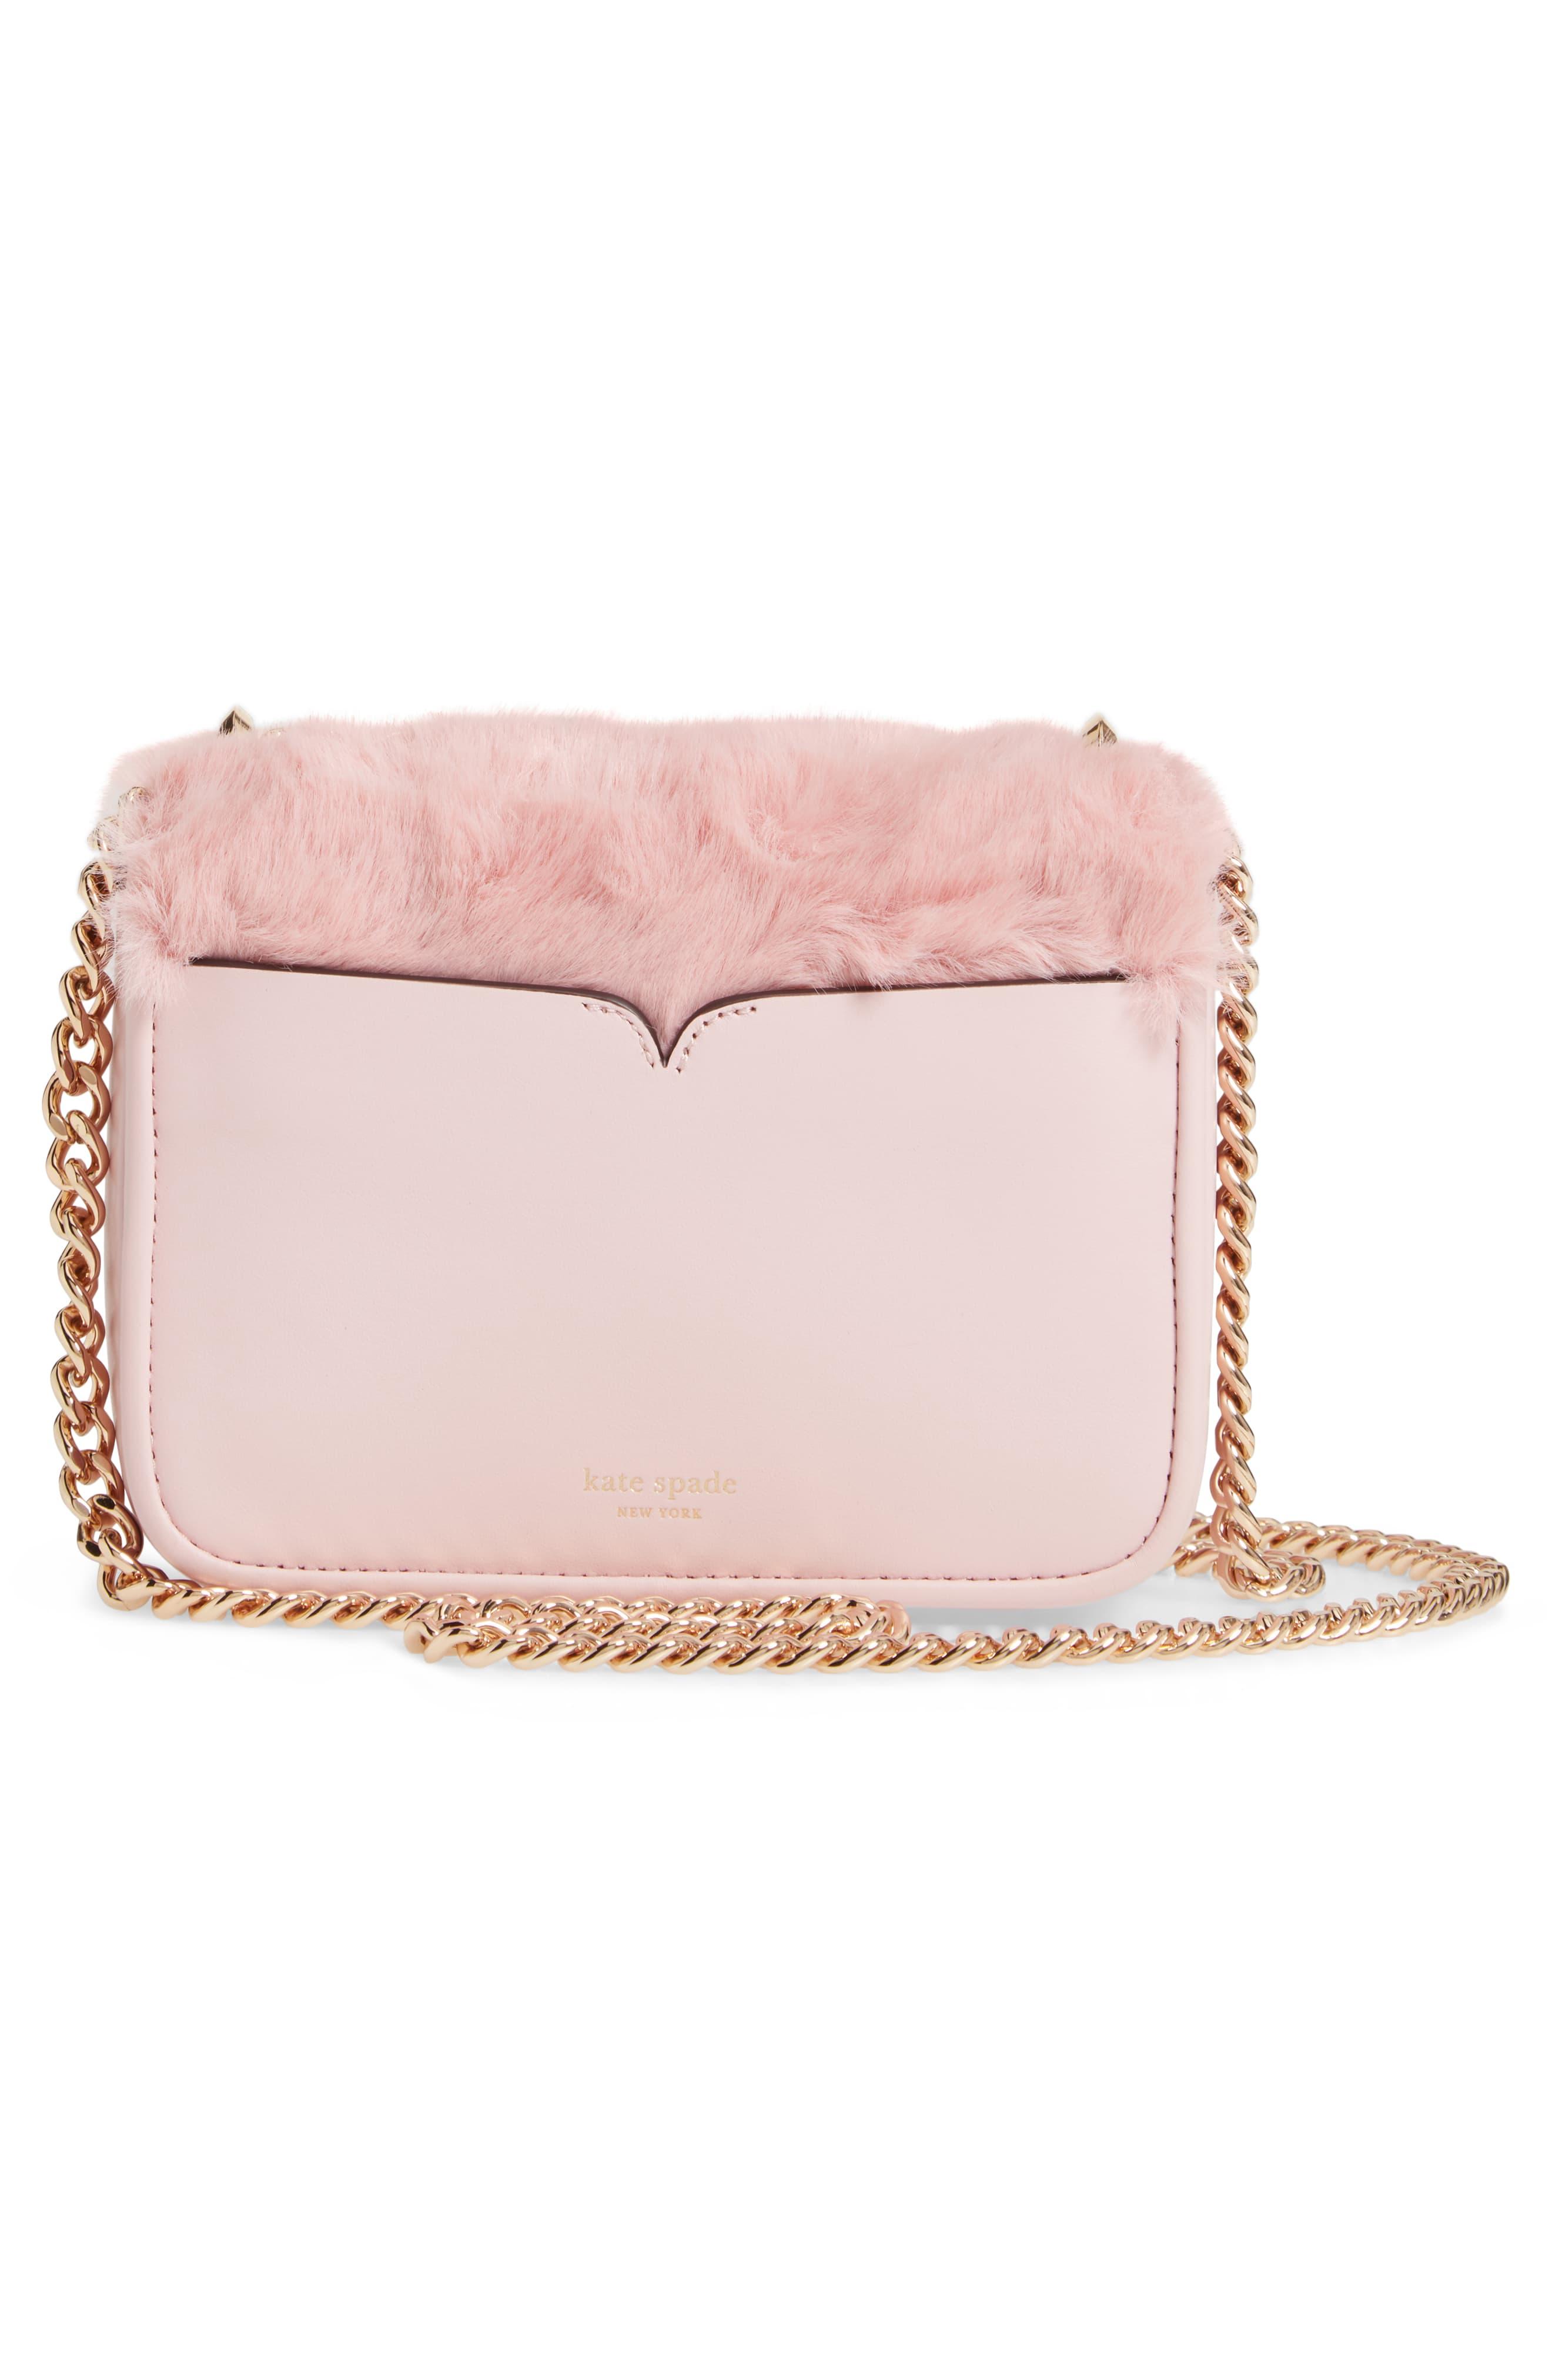 Kate Spade Small Nicola Faux Fur & Leather Shoulder Bag in Pink | Lyst